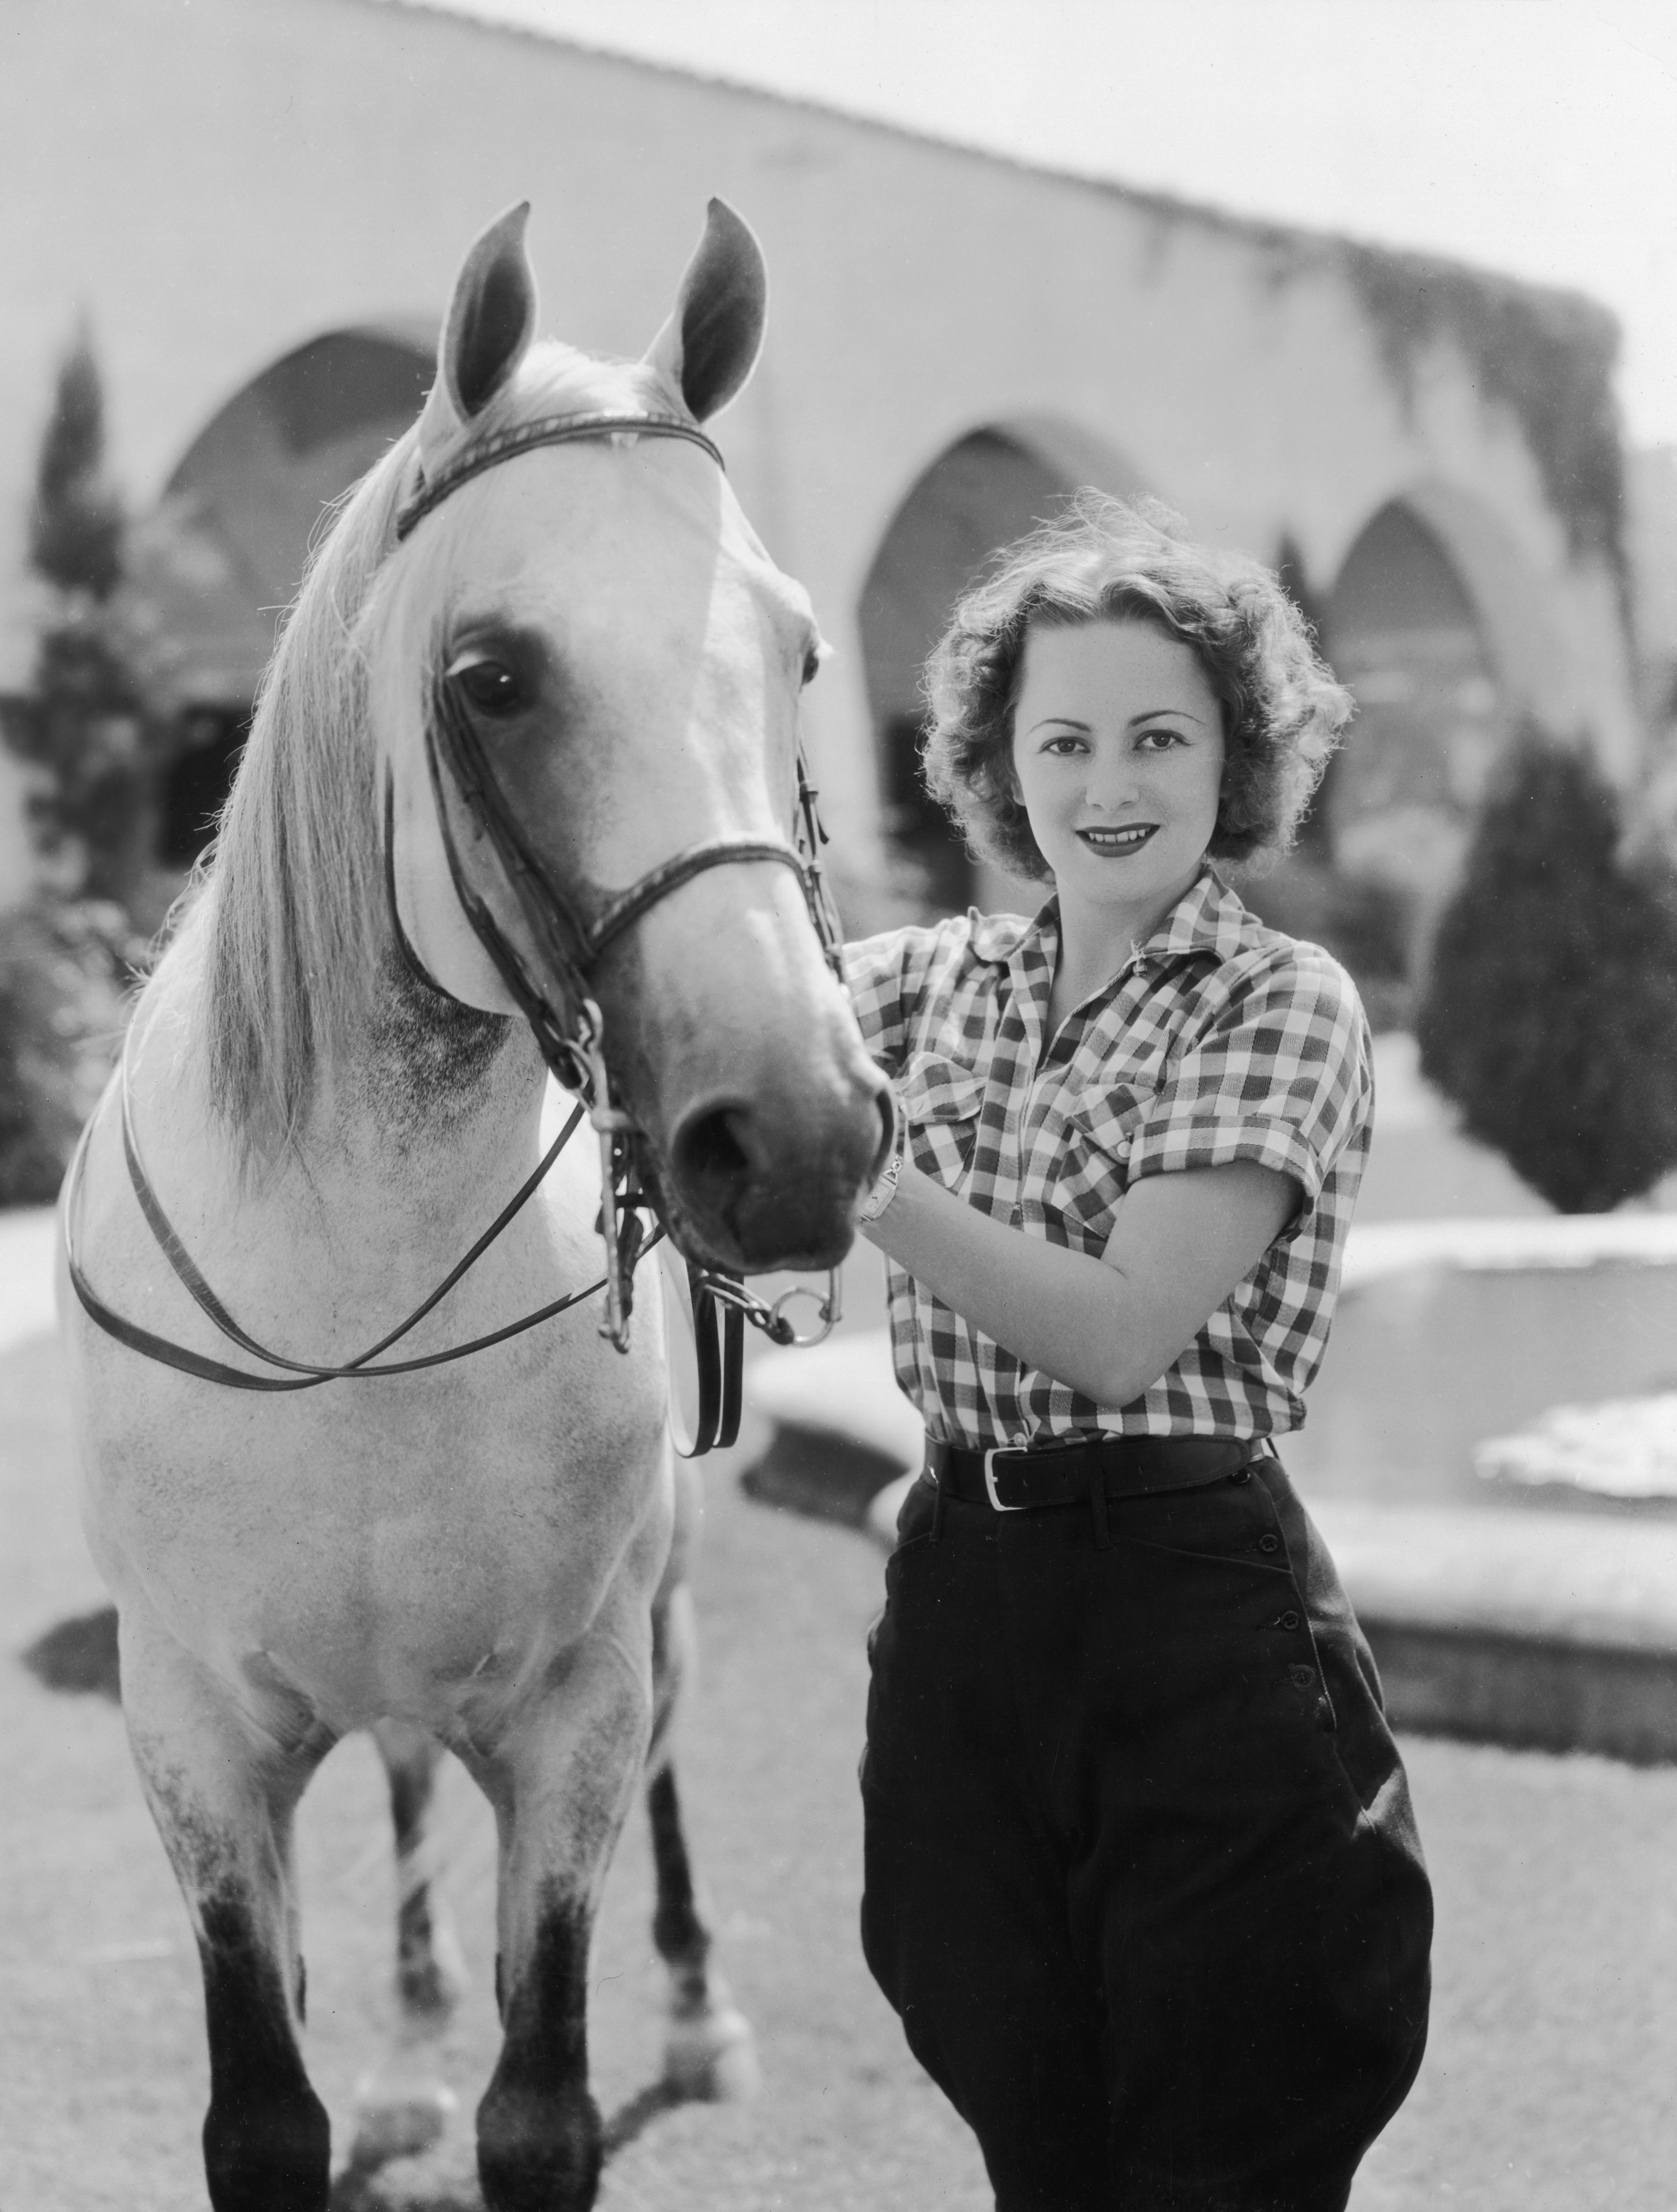 Actress Olivia de Havilland stands next to a horse and holds its reigns in front of cloisters and a fountain. Circa 1935 | Source: Getty Images